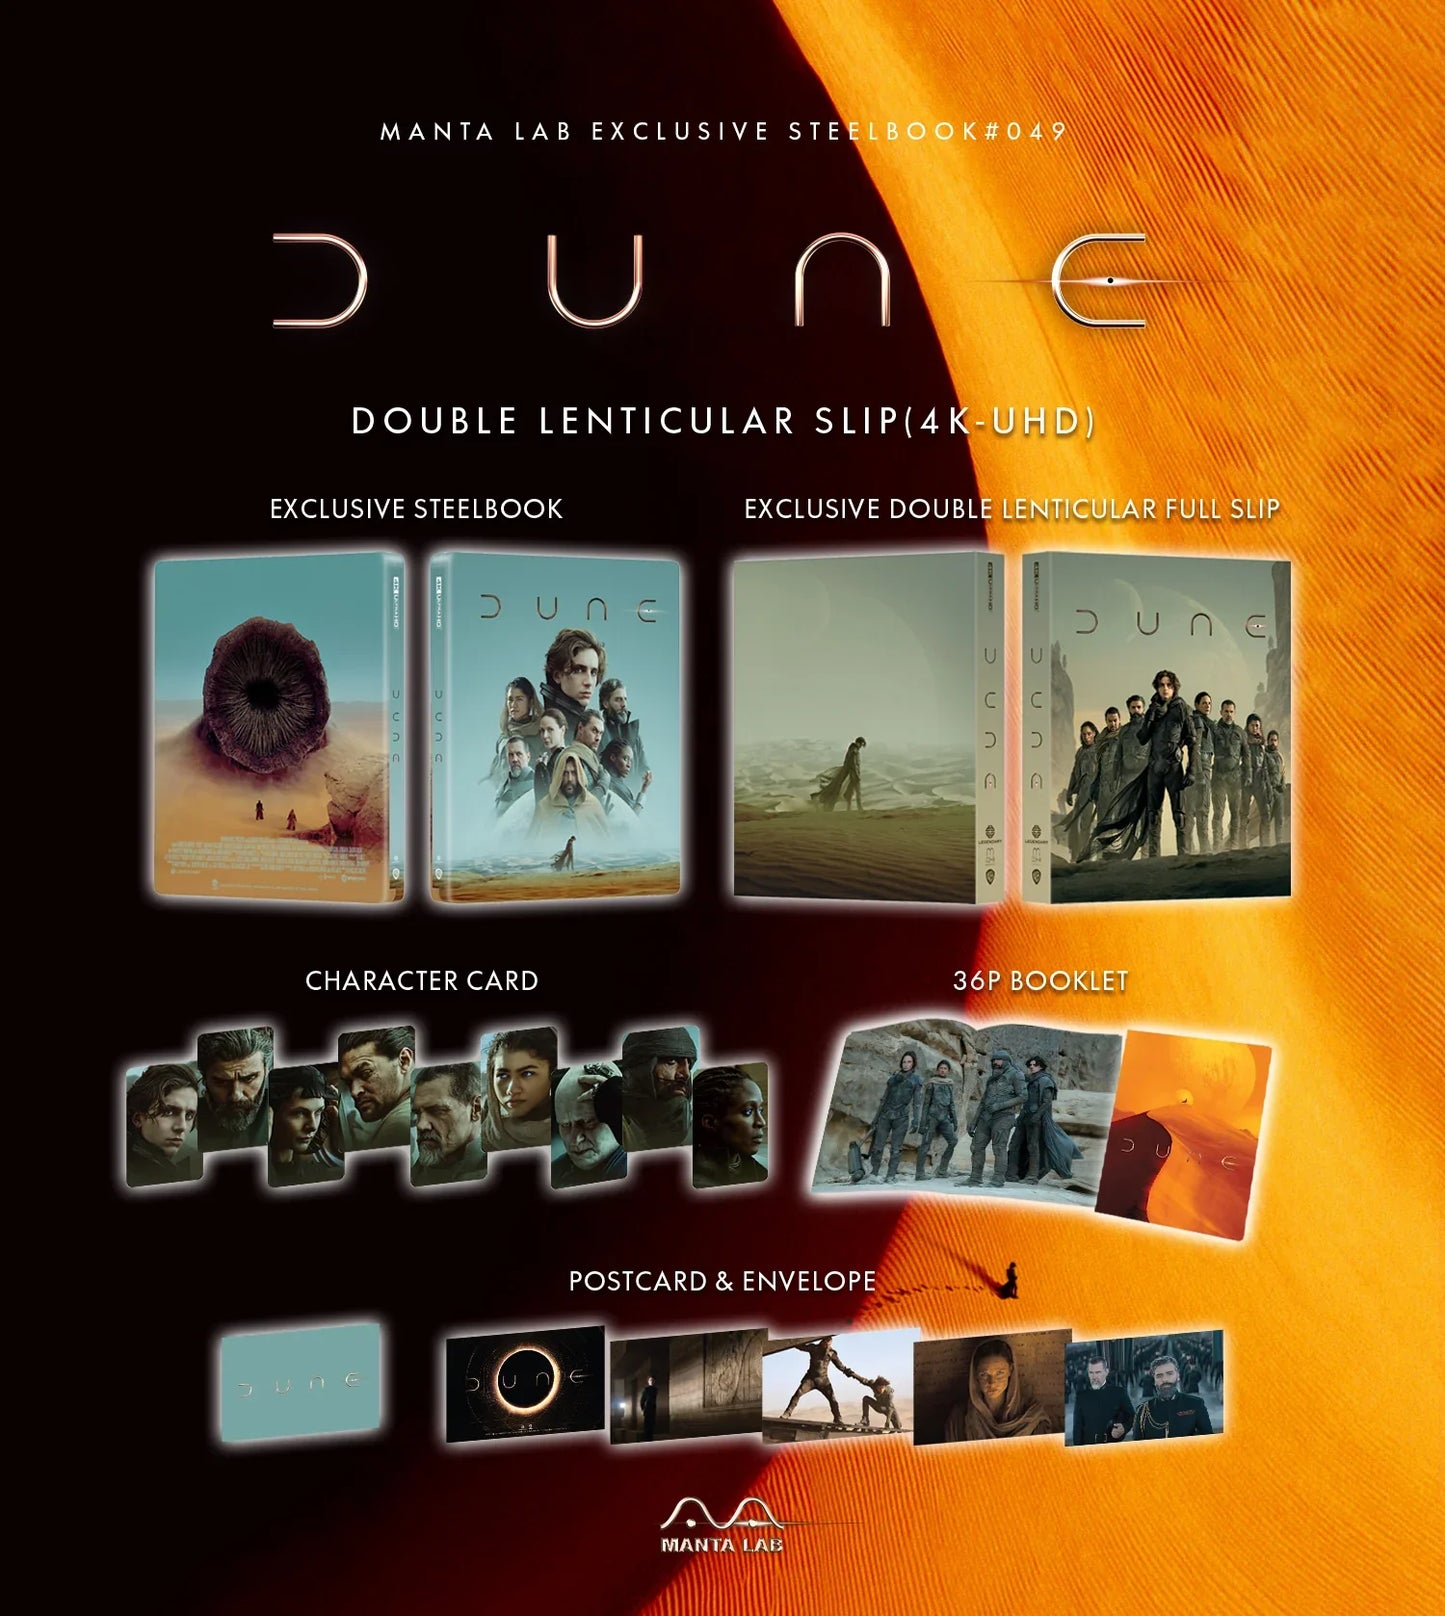 Dune 4K Blu-ray Steelbook Collectong Manta Lab Exclusive ME#49 One Click Box Set #007